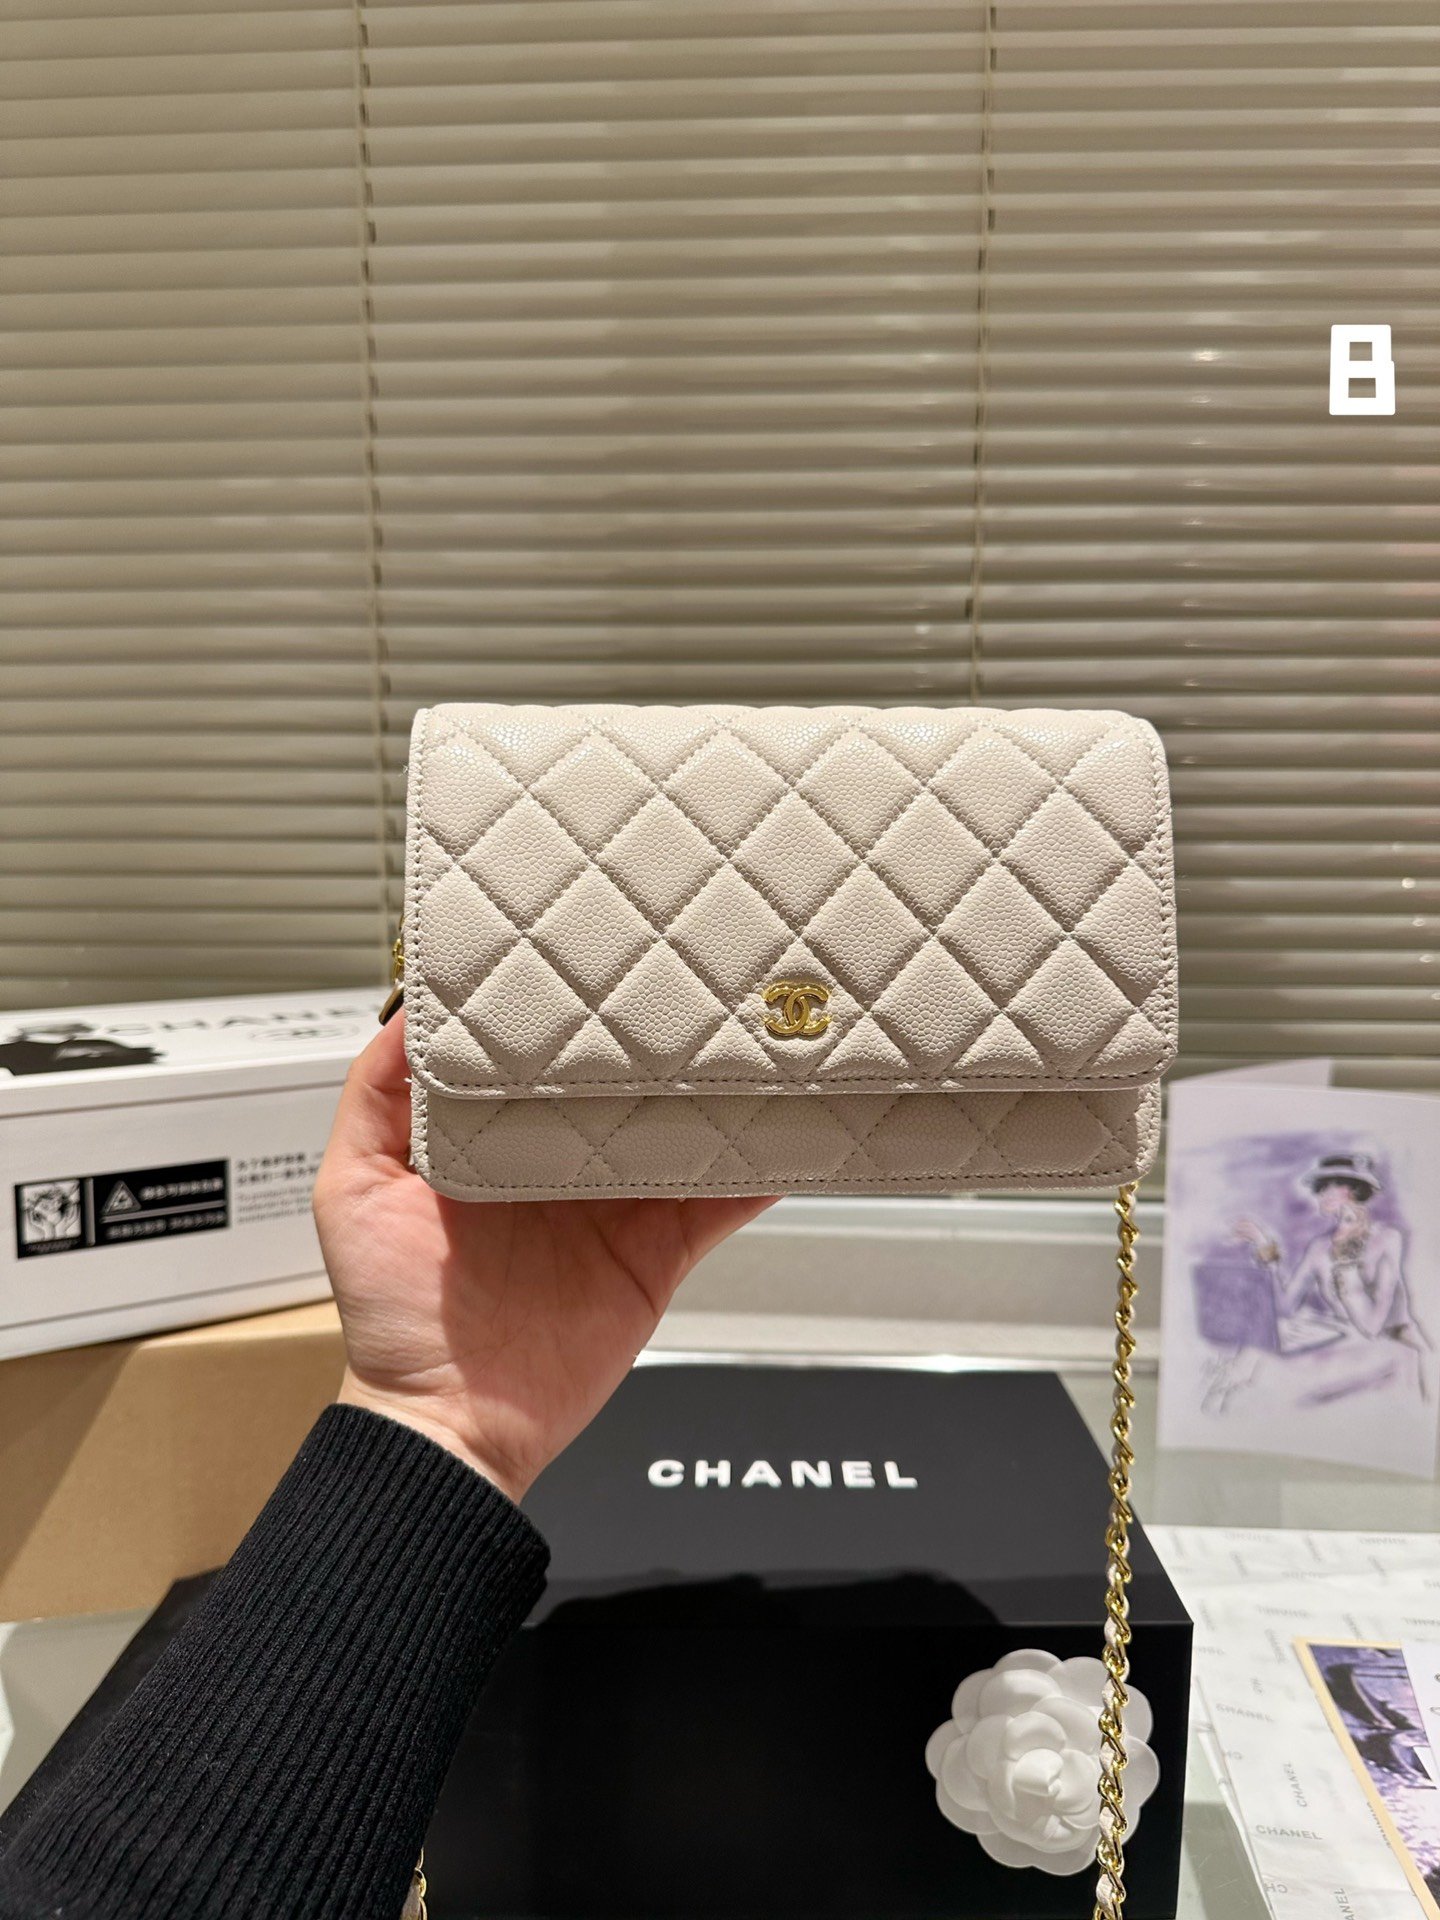 Chanel caviar patterned calf leather small square bag